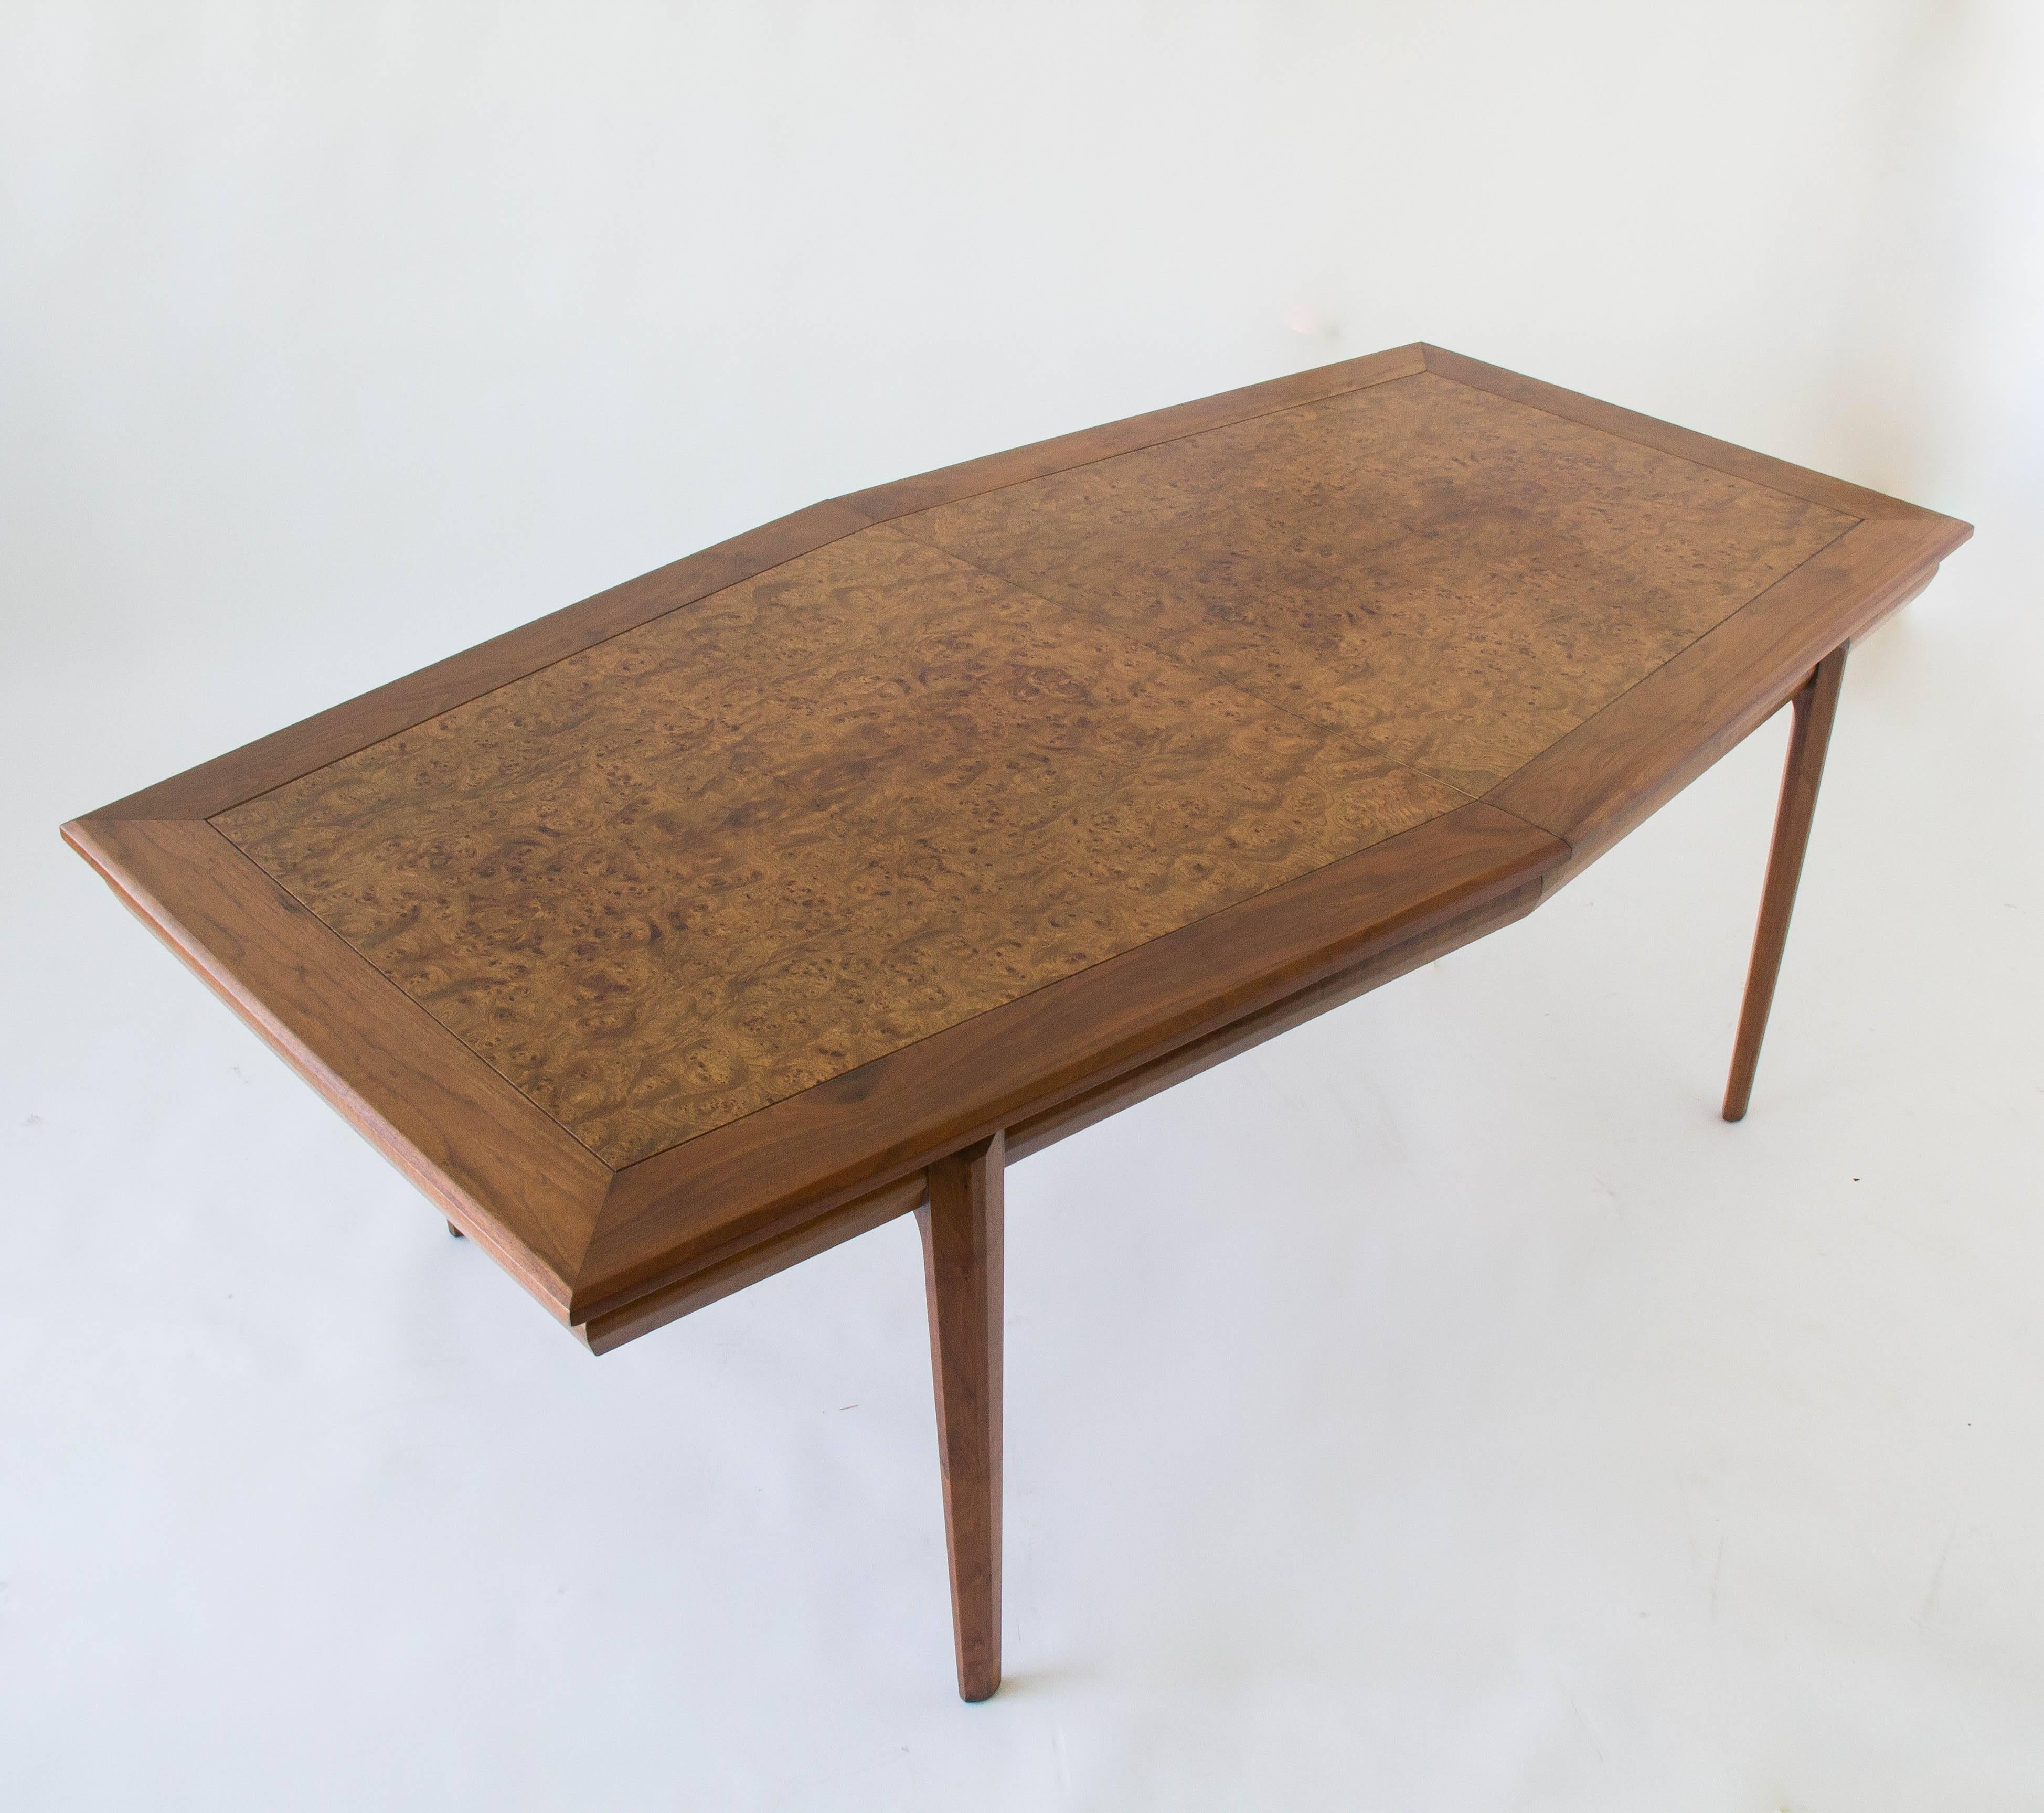 An elongated hexagonal dining or conference table, designed by Maurice Bailey and produced by Cal-Mode of Culver City (know subsequently as Monteverdi Young. The tabletop has inlaid burlwood in a corresponding hexagonal shape. Two extending leaves